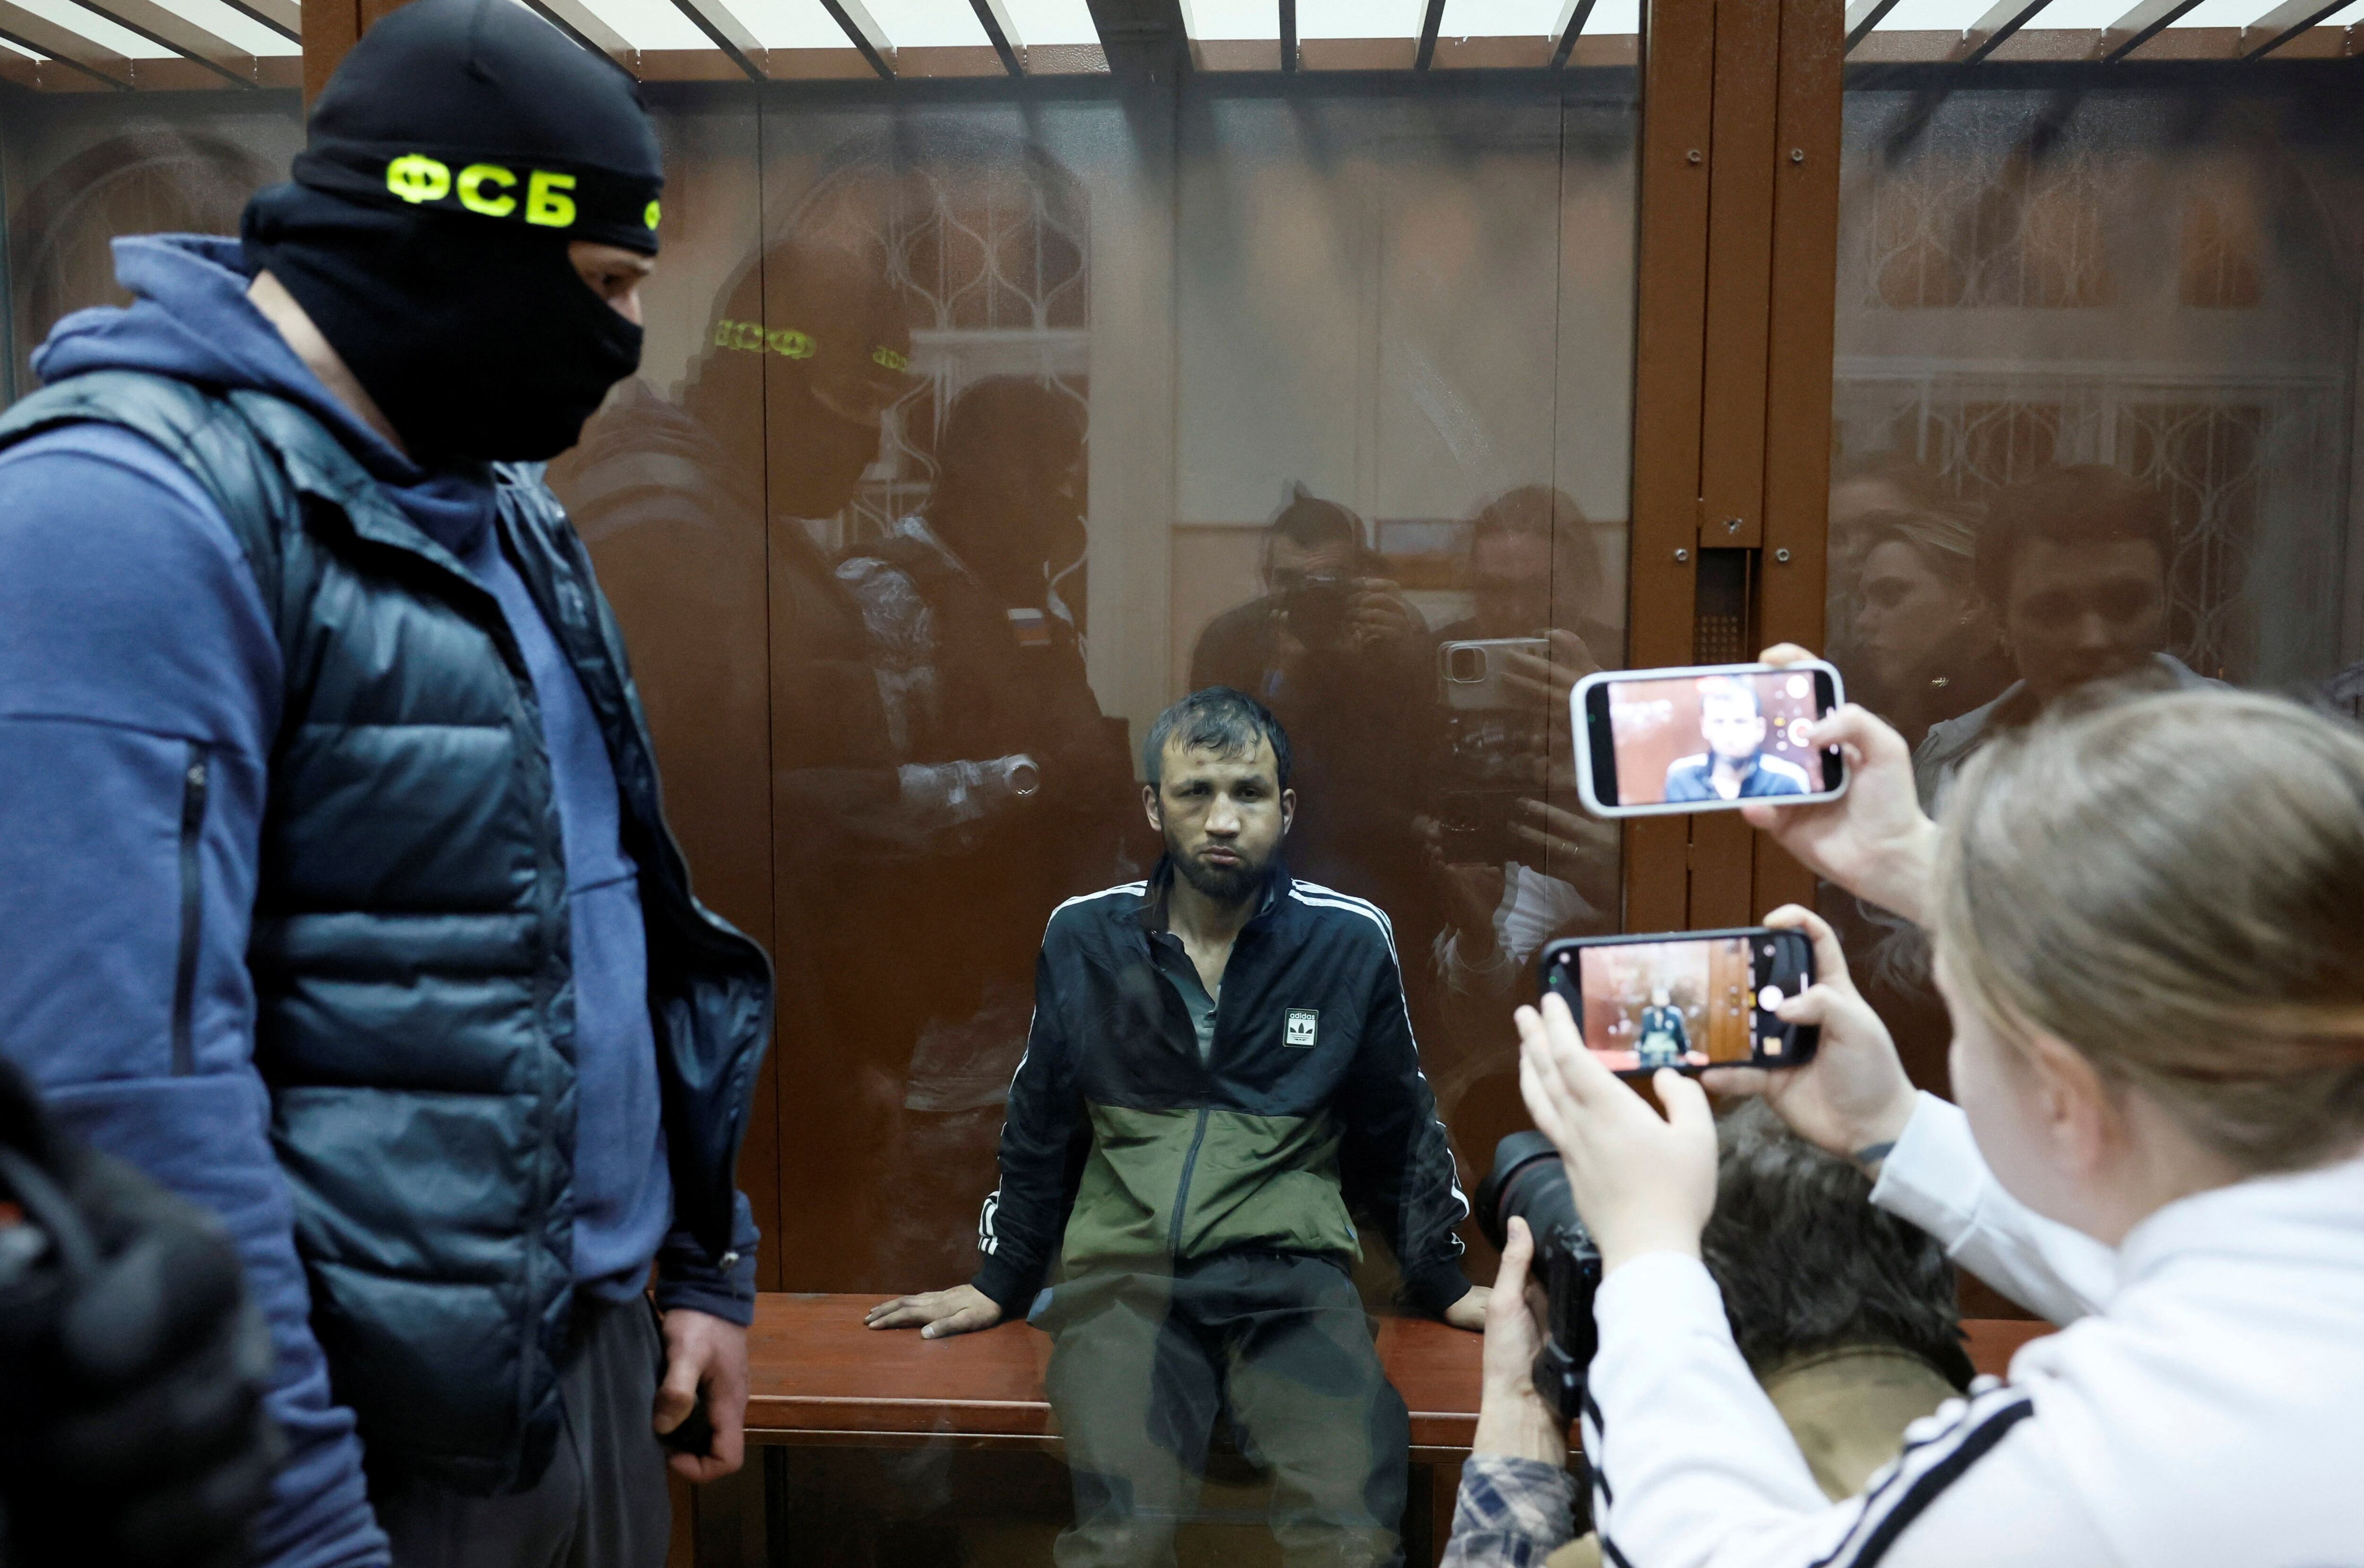 Shamsidin Fariduni, a suspect in the shooting attack at the Crocus City Hall concert venue, sits behind a glass wall of an enclosure for defendants before a court hearing at the Basmanny district court in Moscow, Russia March 25, 2024. REUTERS/Shamil Zhumatov